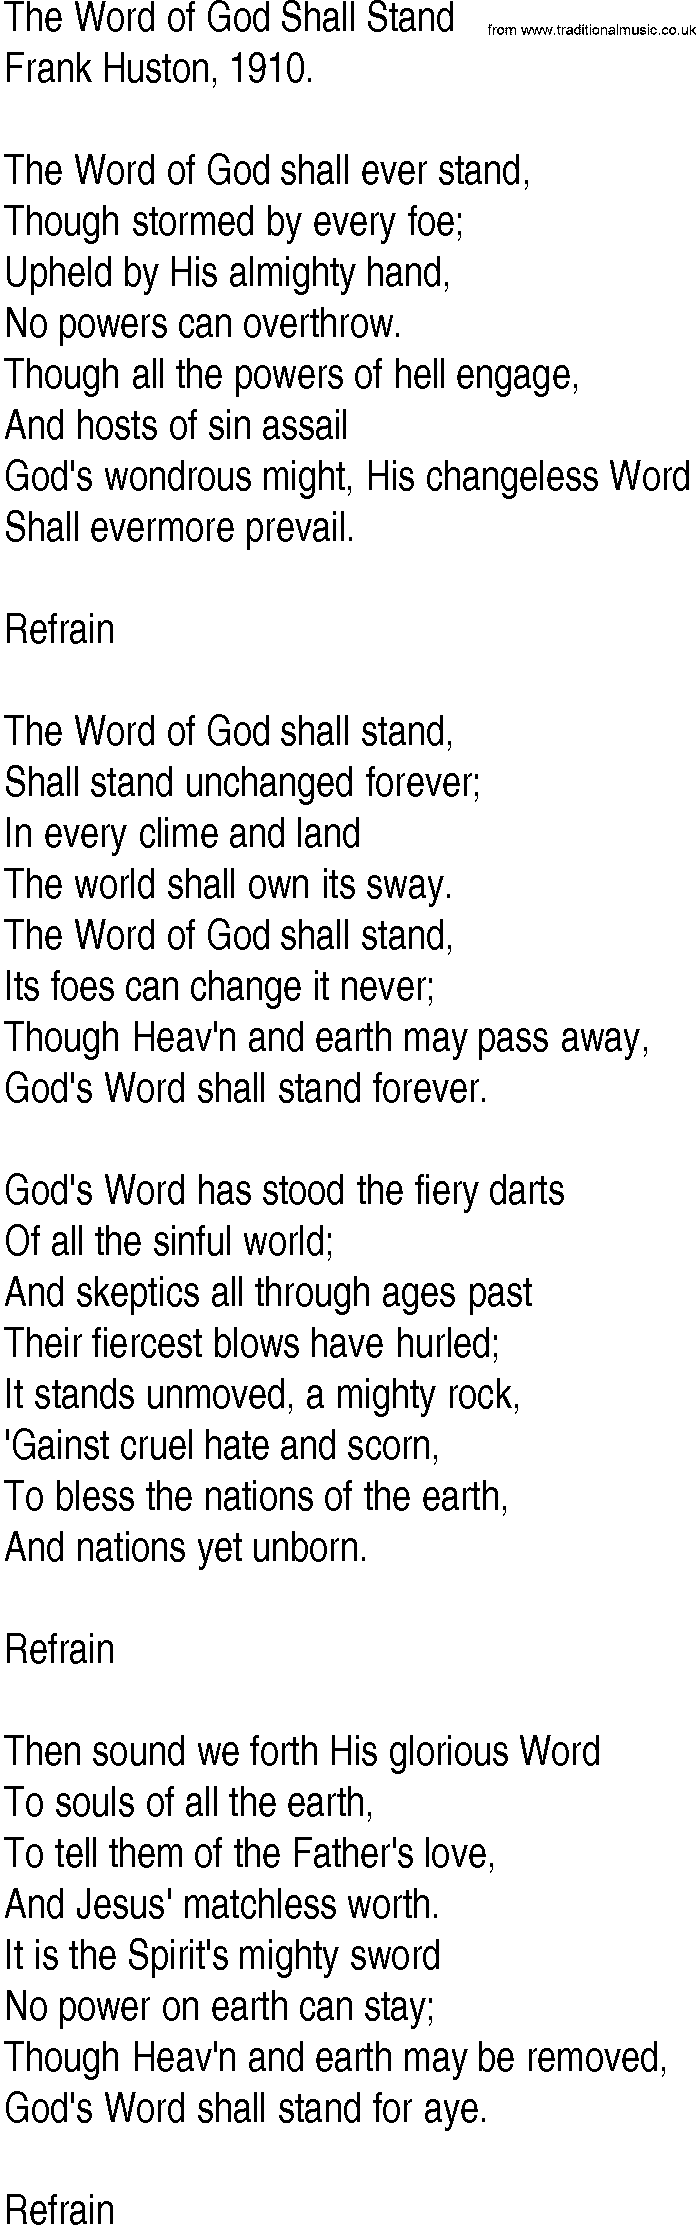 Hymn and Gospel Song: The Word of God Shall Stand by Frank Huston lyrics